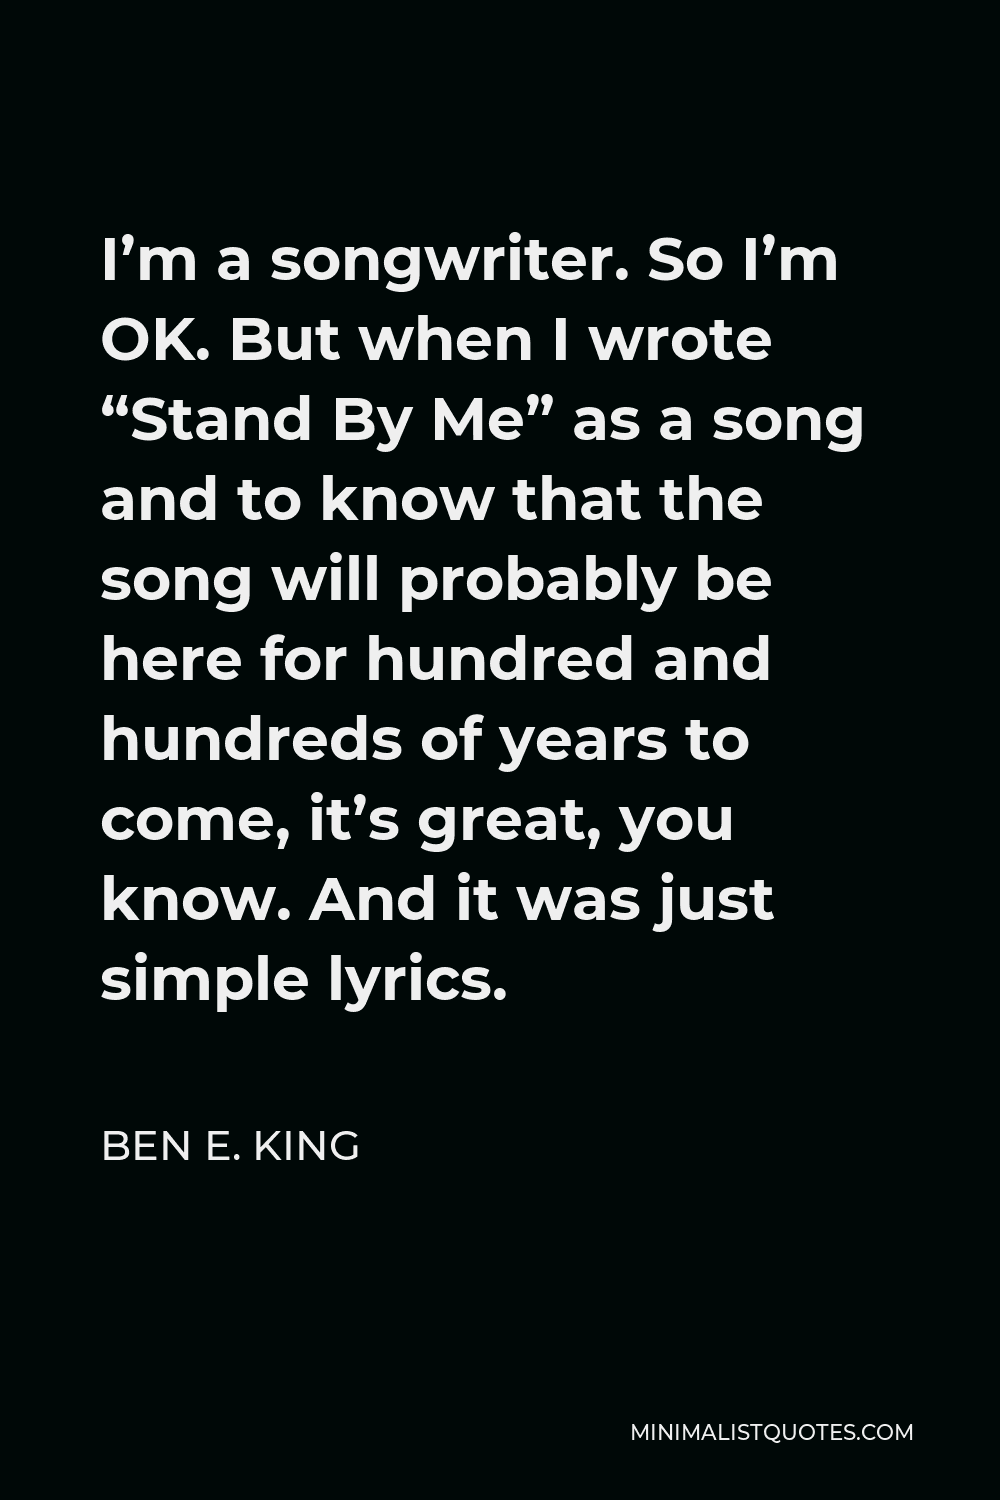 Ben E. King Quote - I’m a songwriter. So I’m OK. But when I wrote “Stand By Me” as a song and to know that the song will probably be here for hundred and hundreds of years to come, it’s great, you know. And it was just simple lyrics.